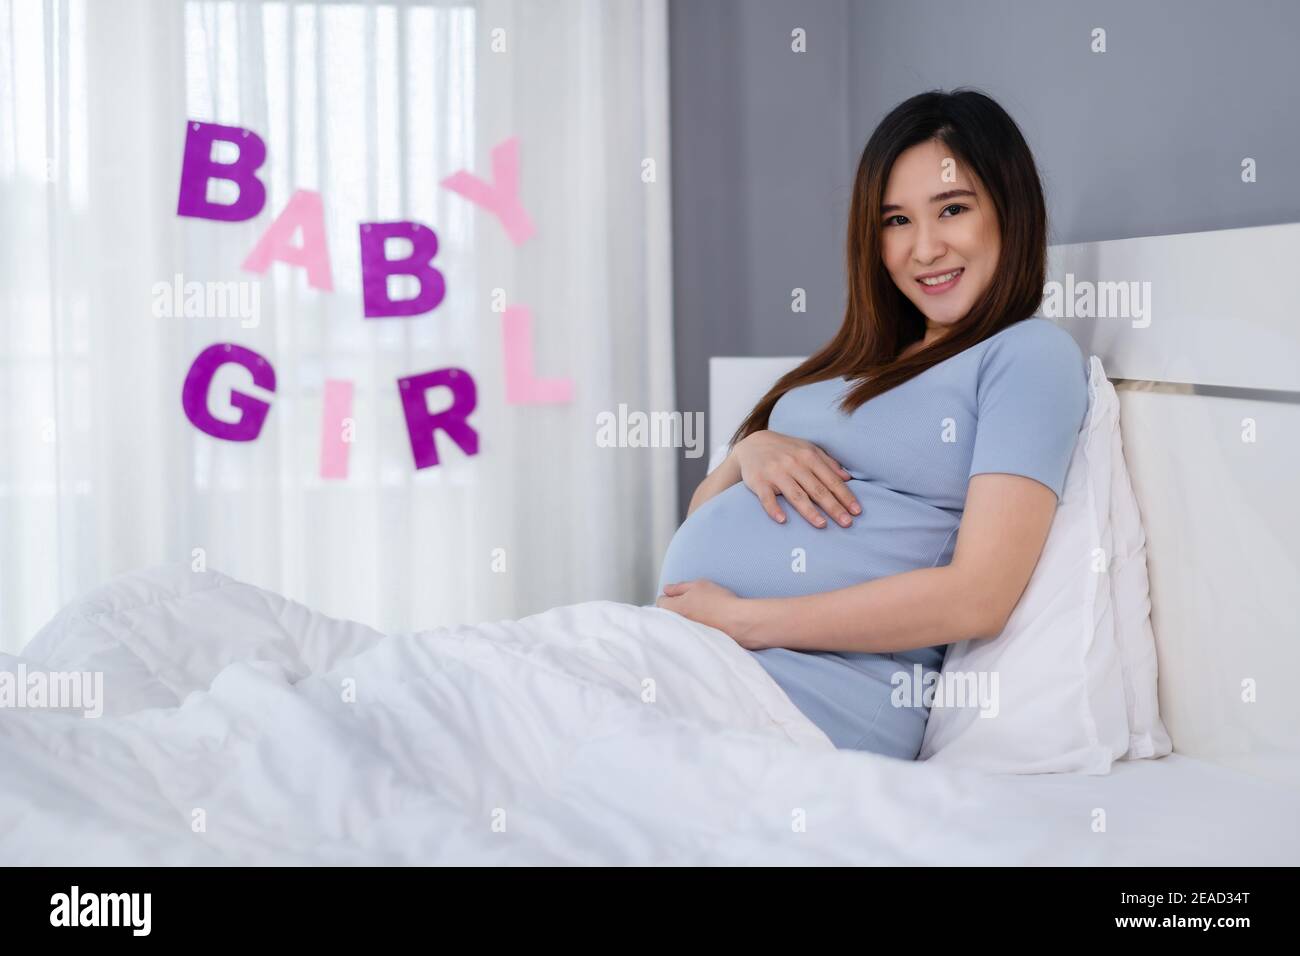 pregnant woman stroking her belly on a bed with baby girl sign Stock Photo